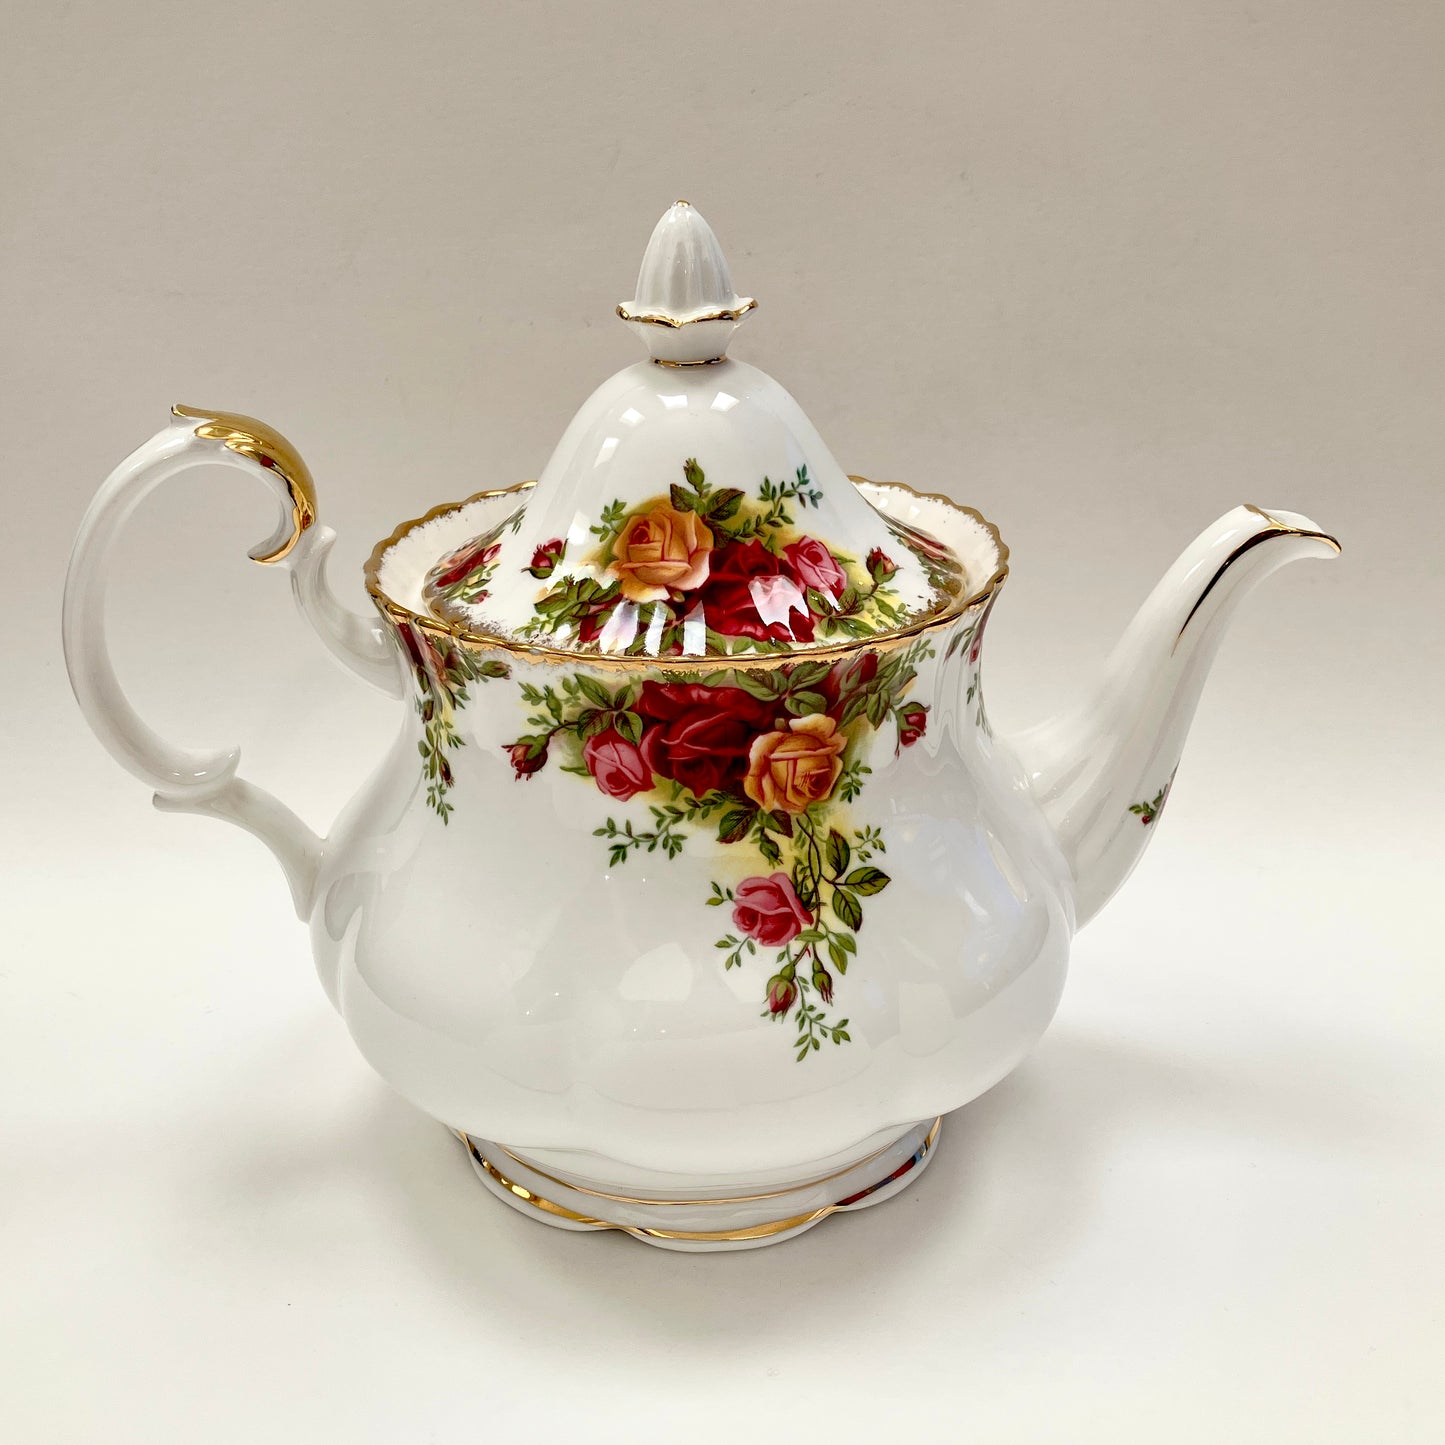 Royal Albert, Old Country Roses, Teapot, Tea pot, Vintage, Fine Bone China, Made in England